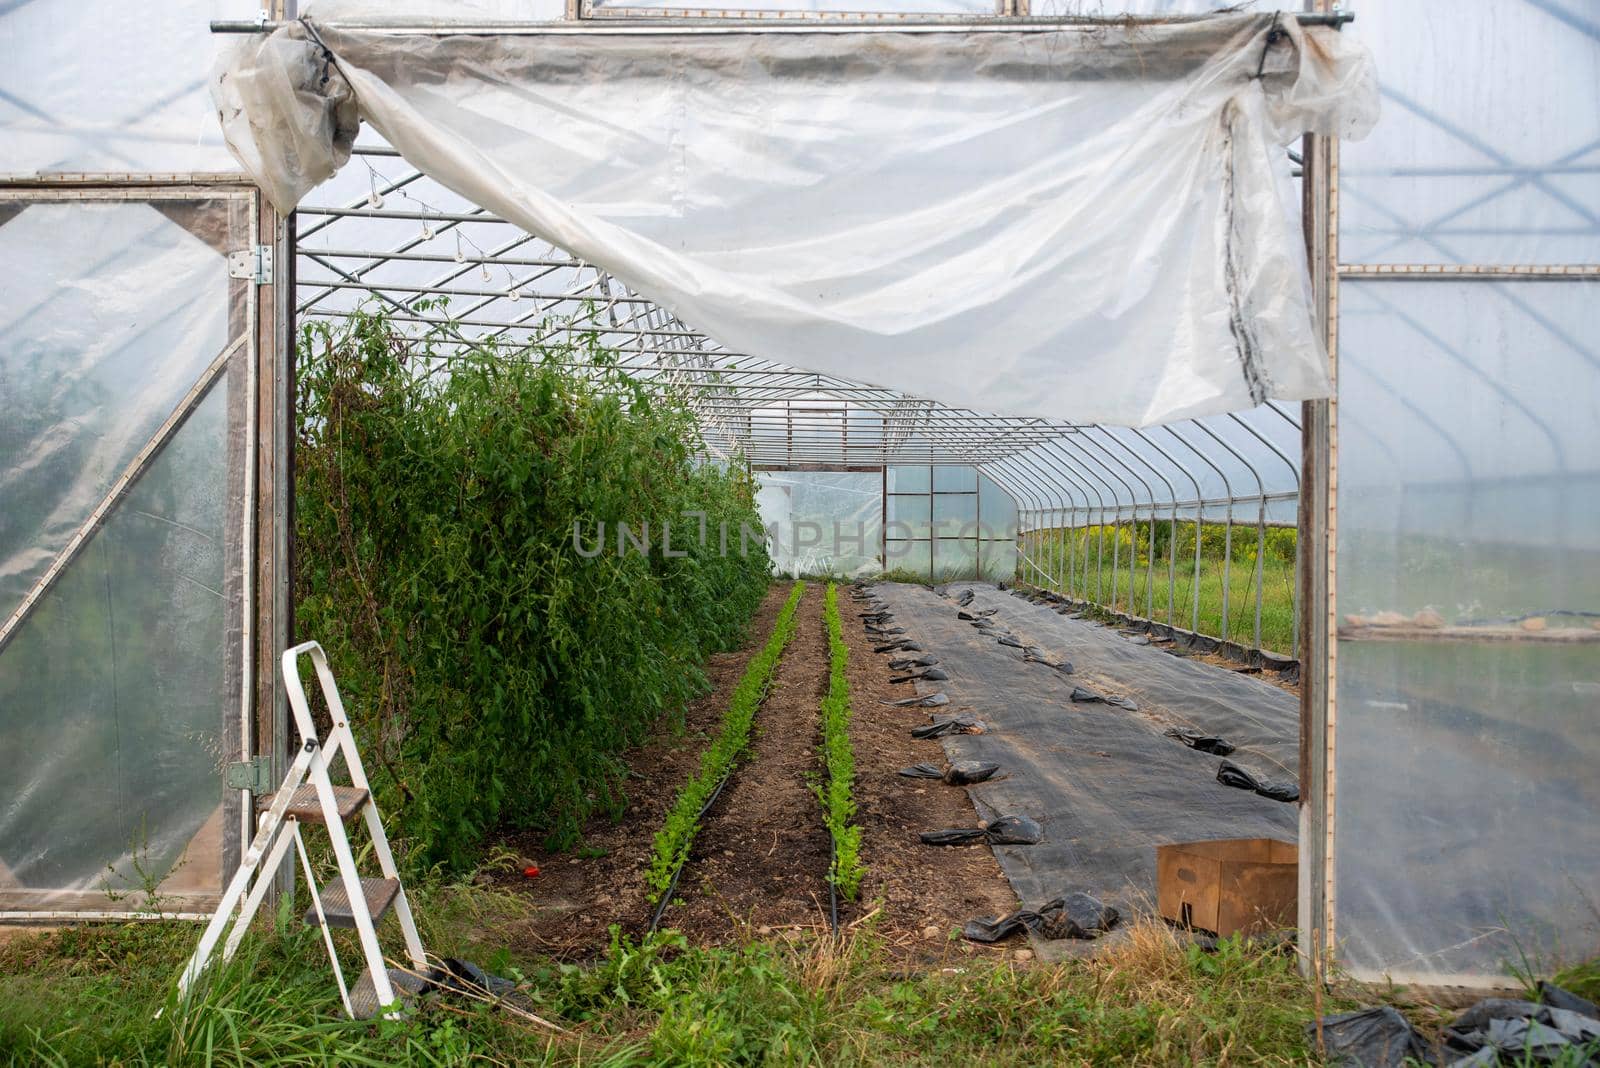 Tomato plants and rows of young cilantro plants extend through the greenhouse interior visible through open door. No people in natural light, organic garden toold and ground cover methods are visible.